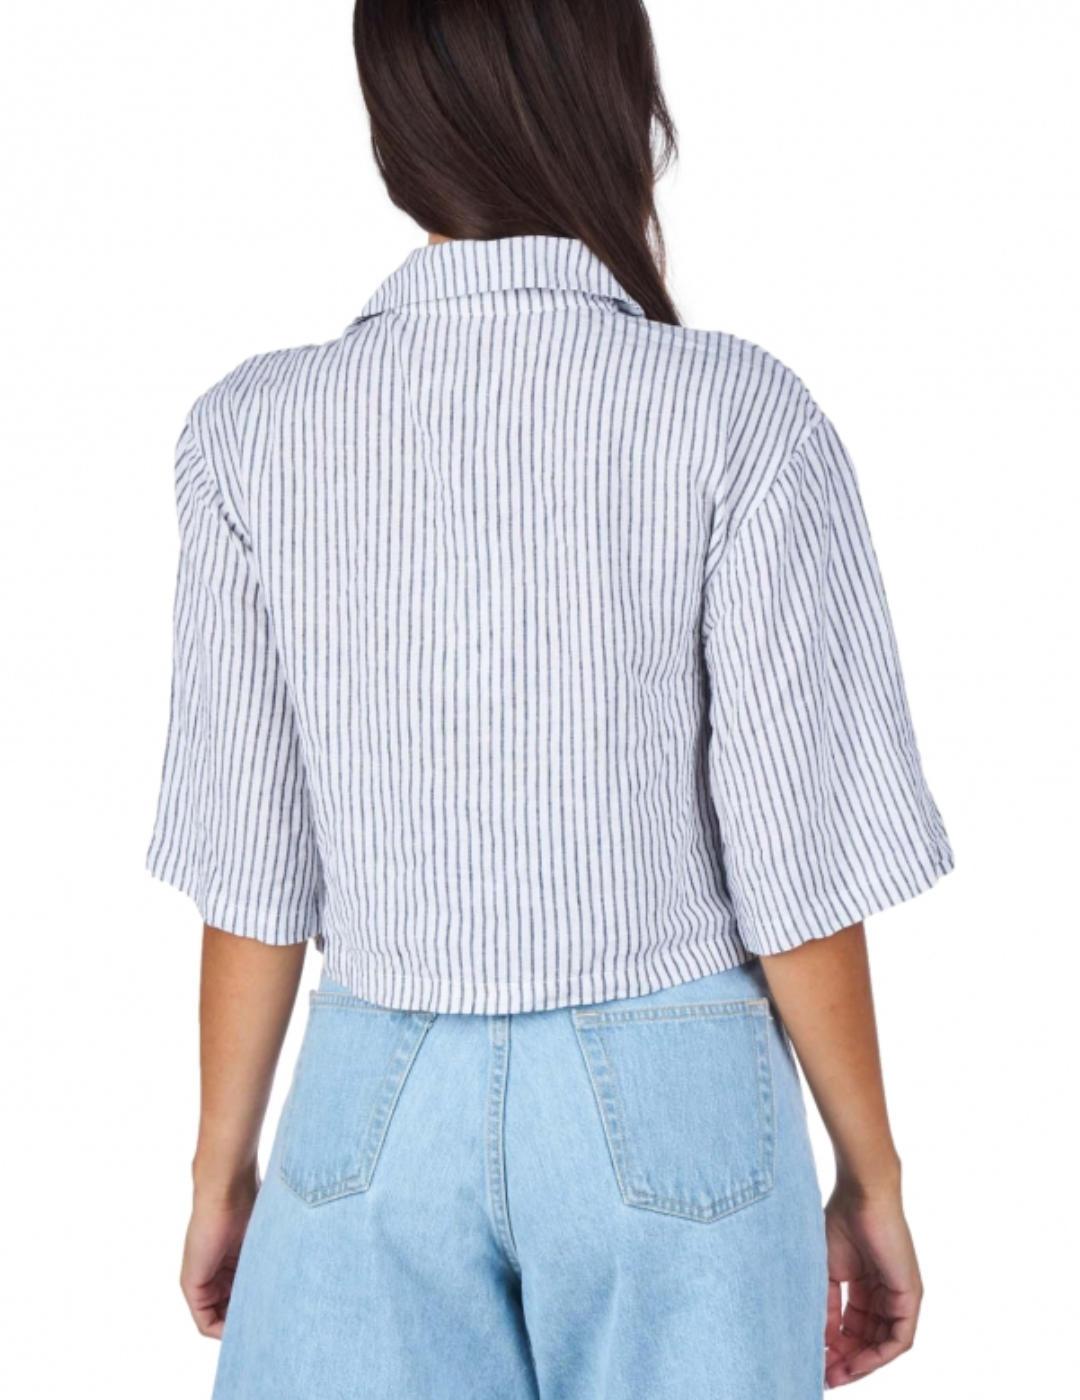 Camisa Only Linette blanco y marino para mujer-a